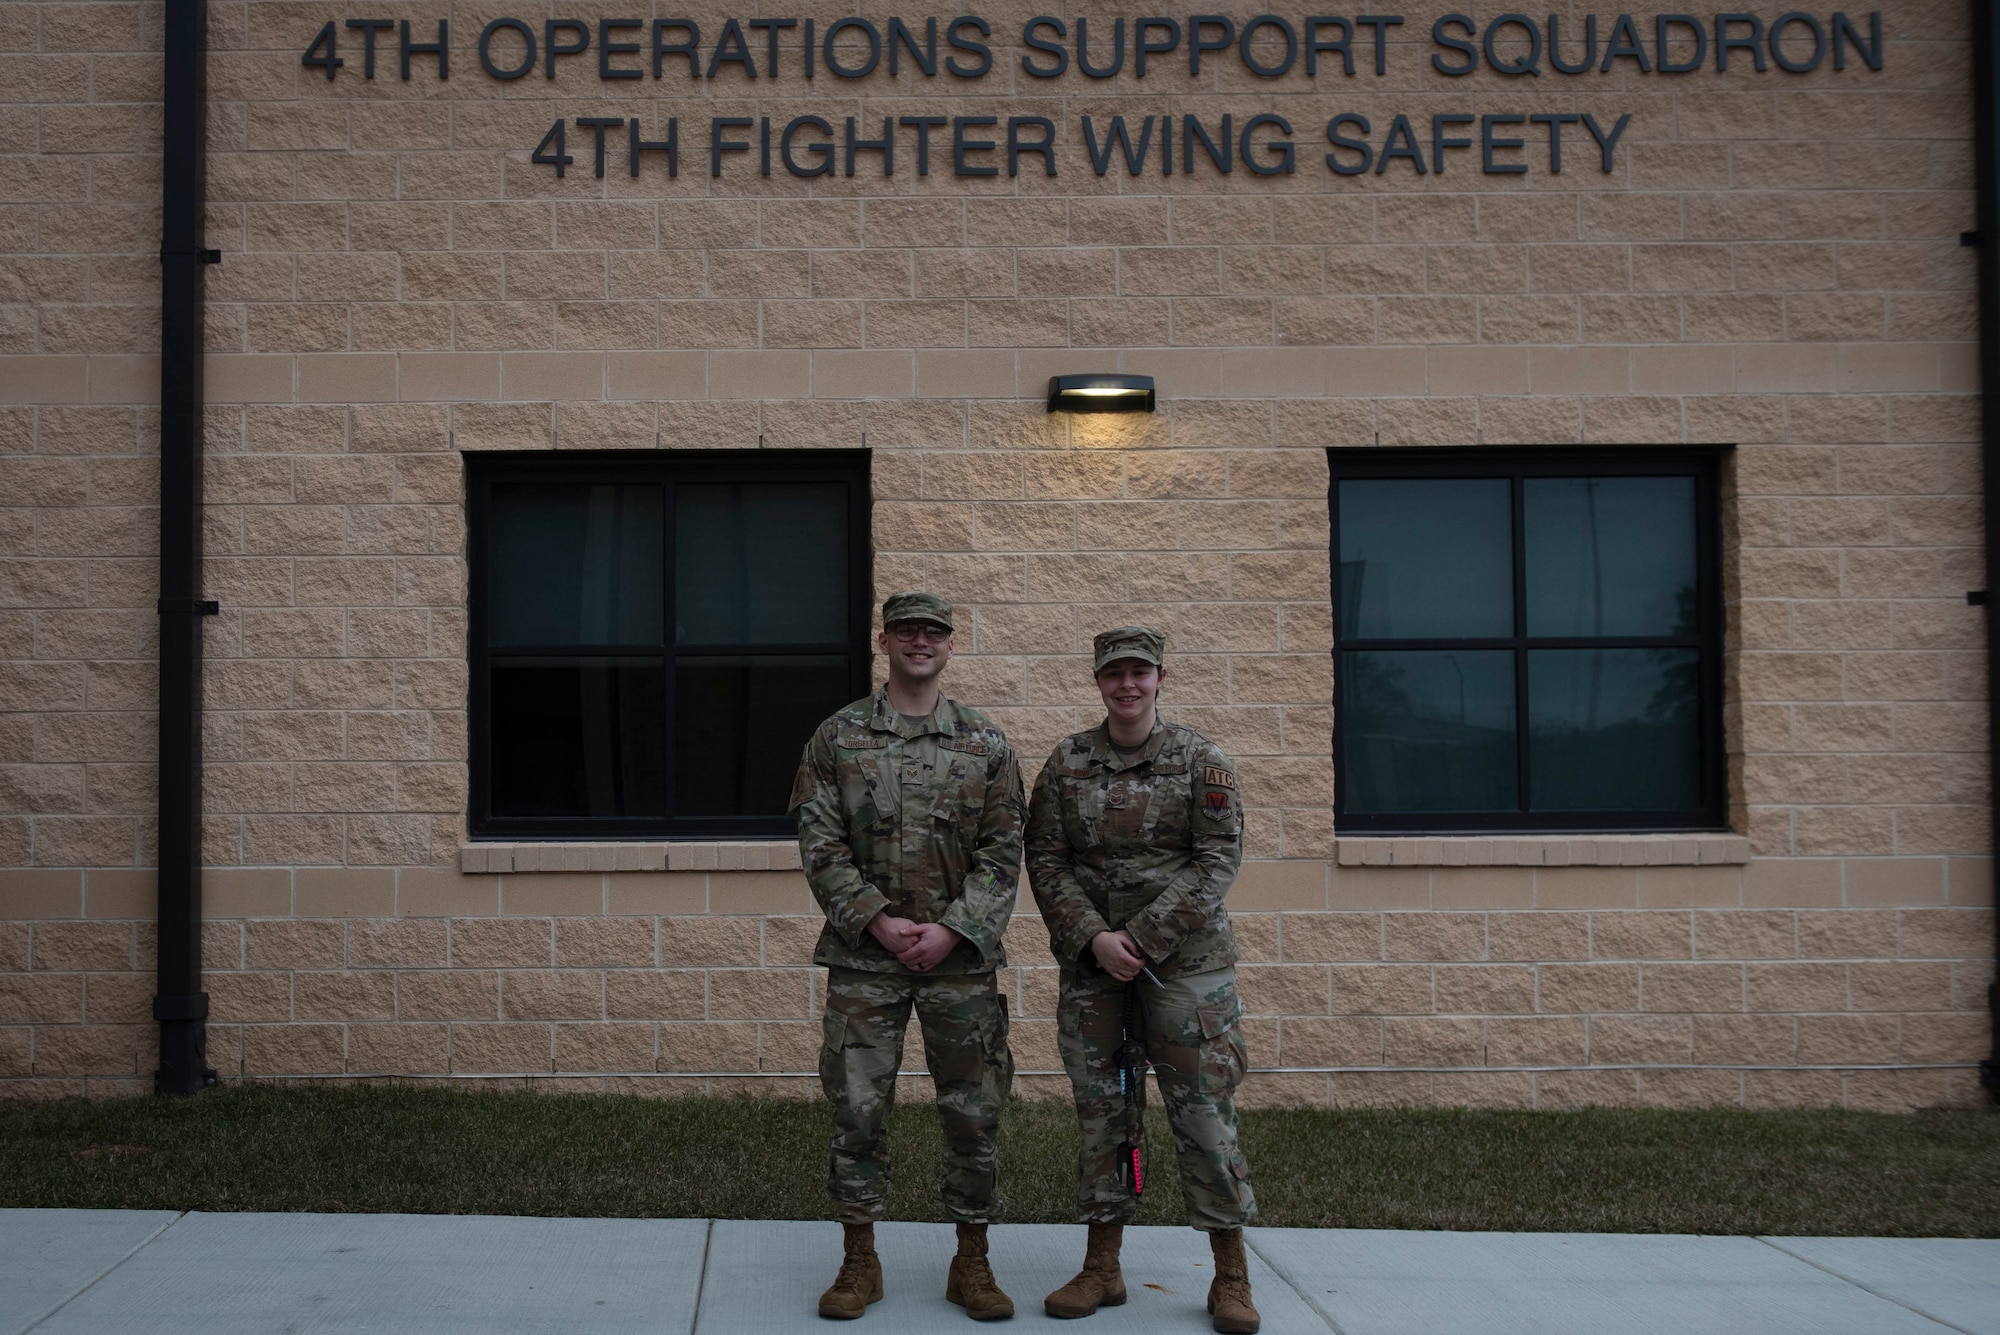 Staff Sgt. Bryce Torsella, left, 4th Operations Support Squadron Radar Approach Control watch supervisor and Tech. Sgt. Justine King, 4th OSS RAPCON senior watch supervisor, pose for a photo at Seymour Johnson Air Force Base, North Carolina, Jan. 20, 2022. Torsella and King were responsible for communications with a civilian pilot during an emergency landing on Dec. 17, 2021. (U.S. Air Force photo by Airman 1st Class Sabrina Fuller)